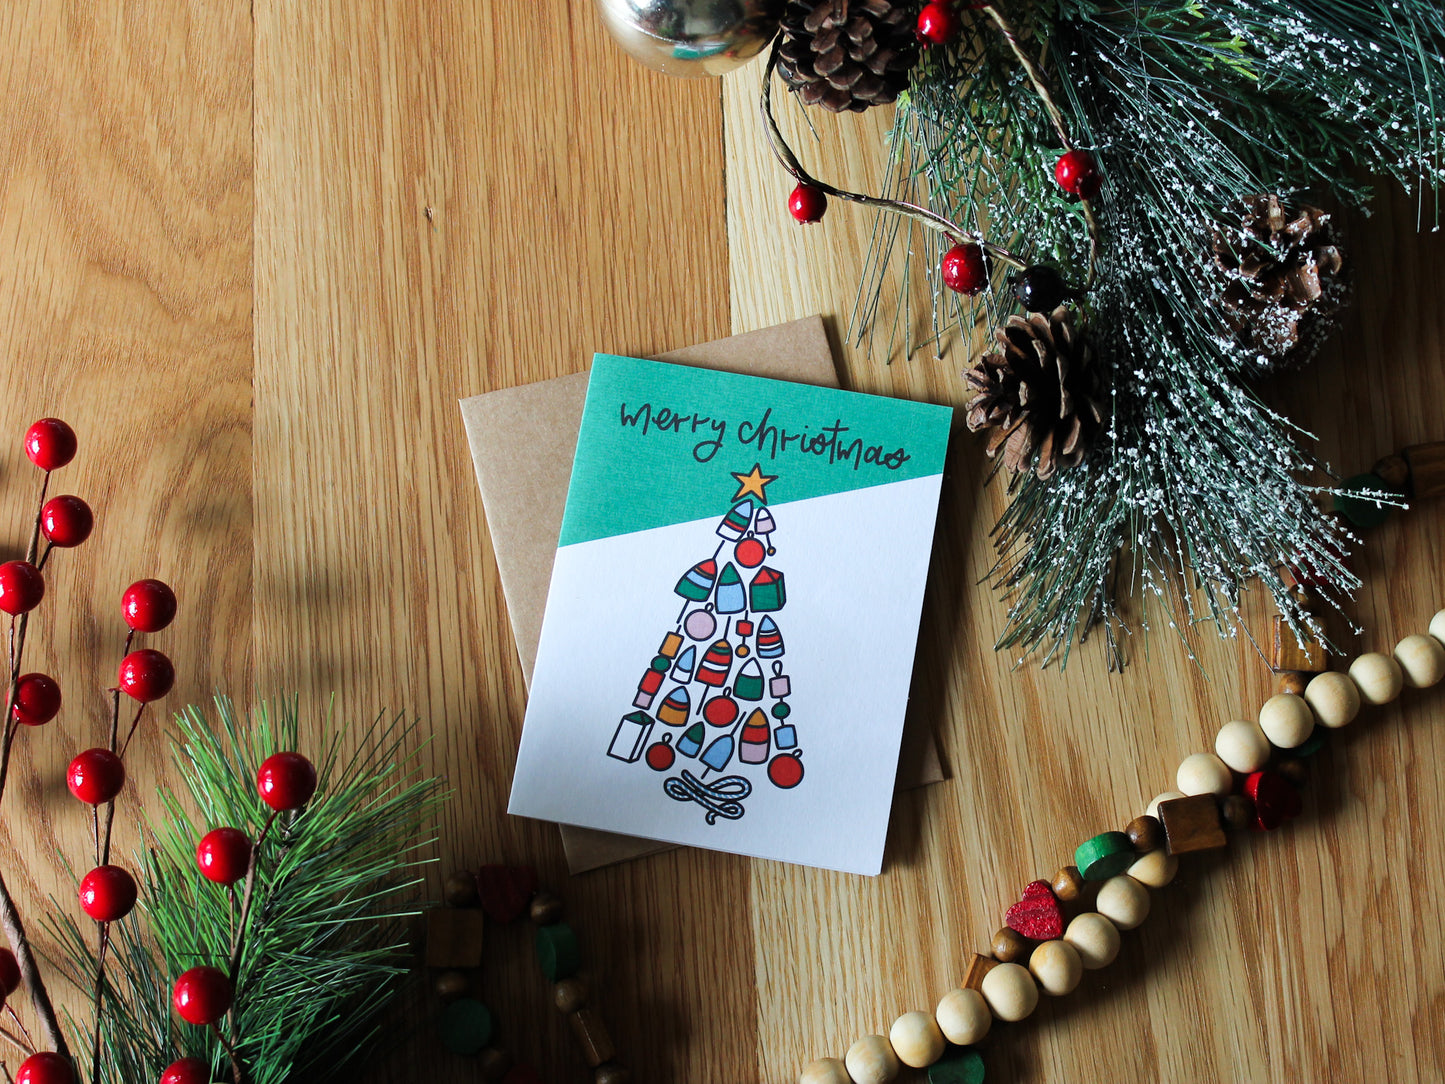 Buoy Tree Holiday Card | Festive Greetings from the East Coast